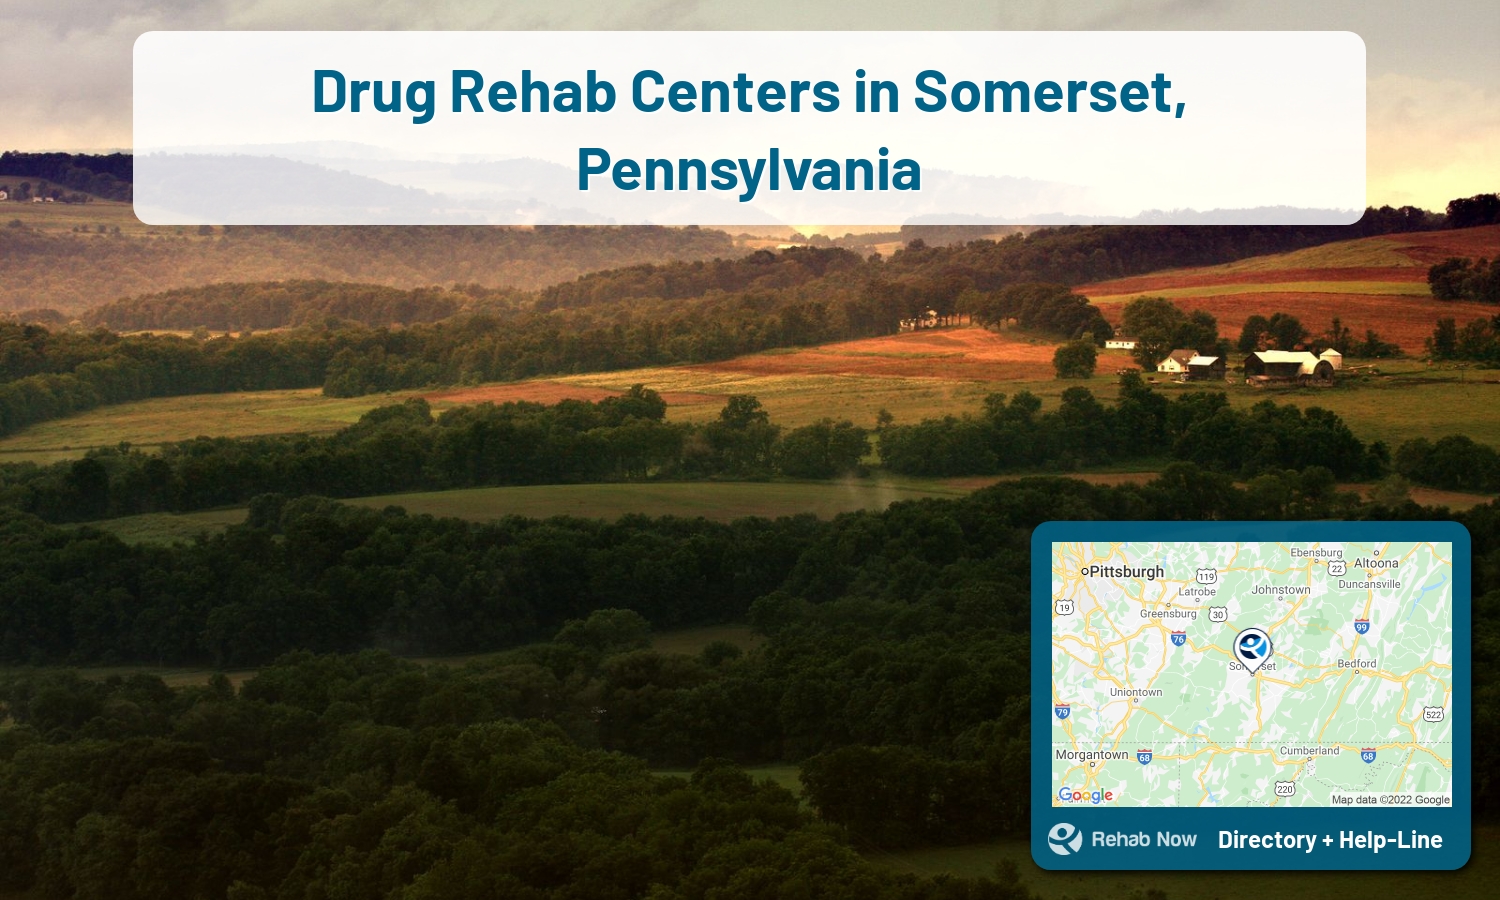 Need treatment nearby in Somerset, Pennsylvania? Choose a drug/alcohol rehab center from our list, or call our hotline now for free help.